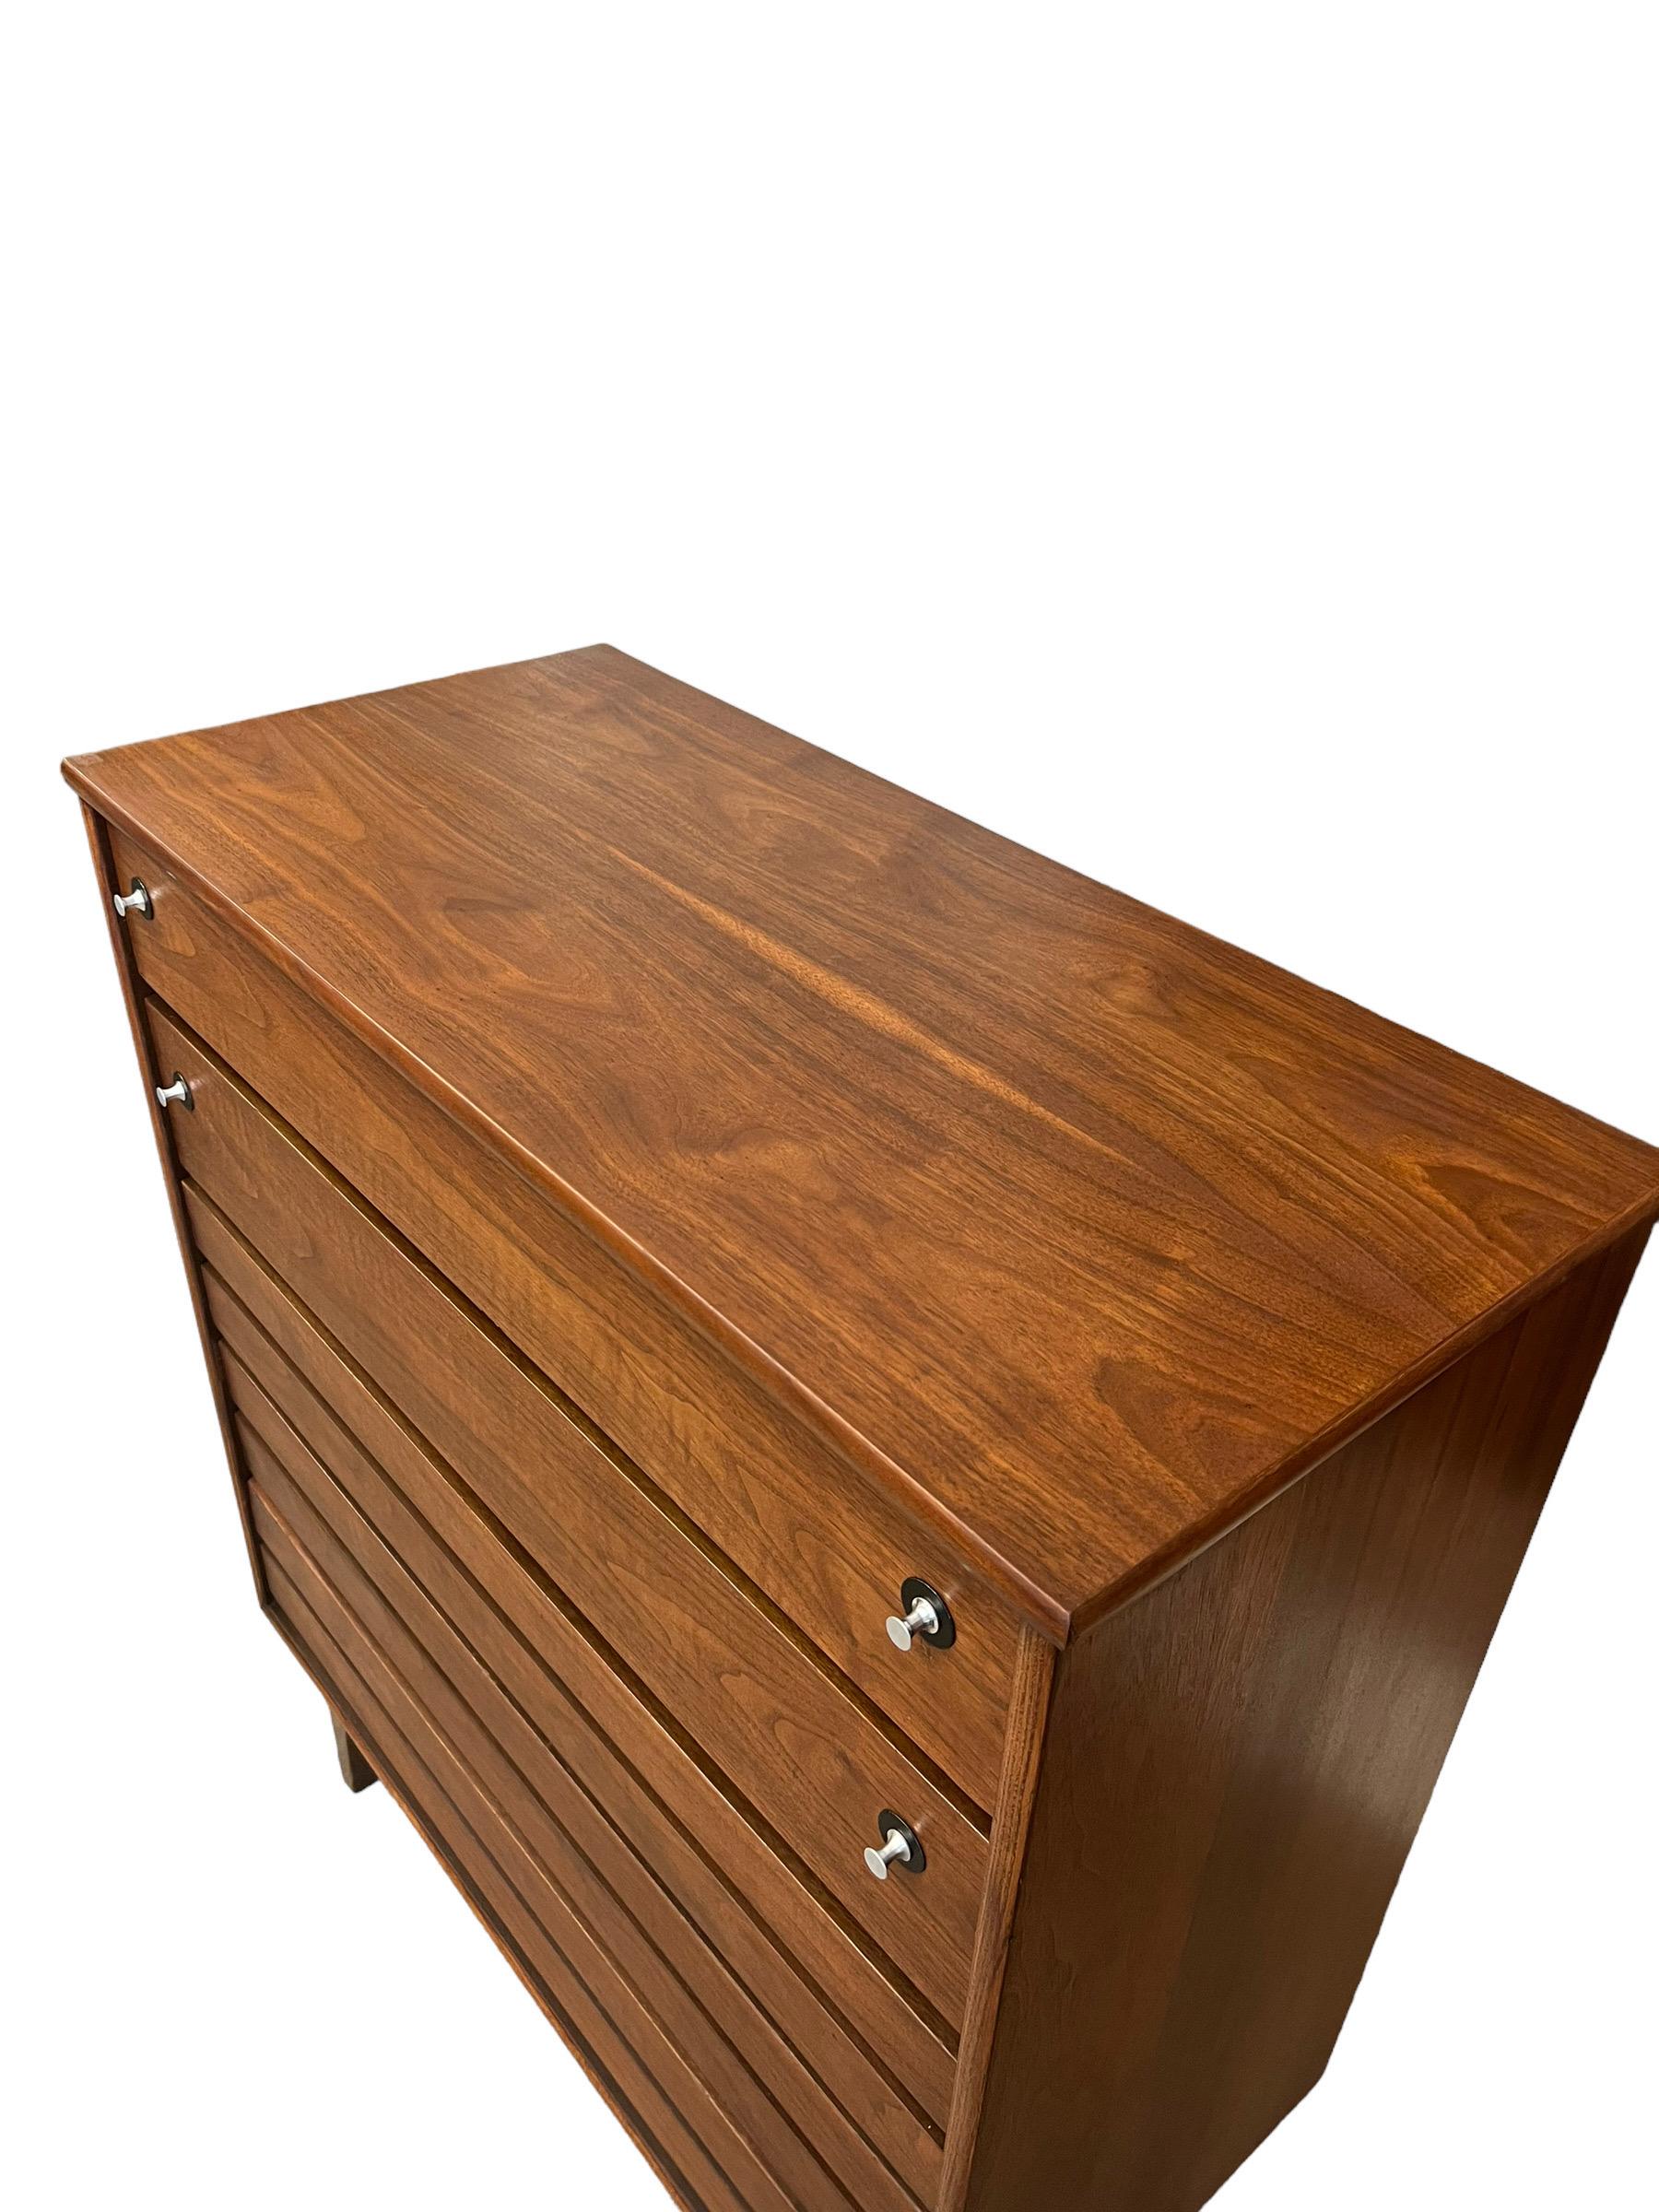 Wood Vintage Mid Century Modern 5 Drawer Dresser by Stanley Dovetail Drawers For Sale